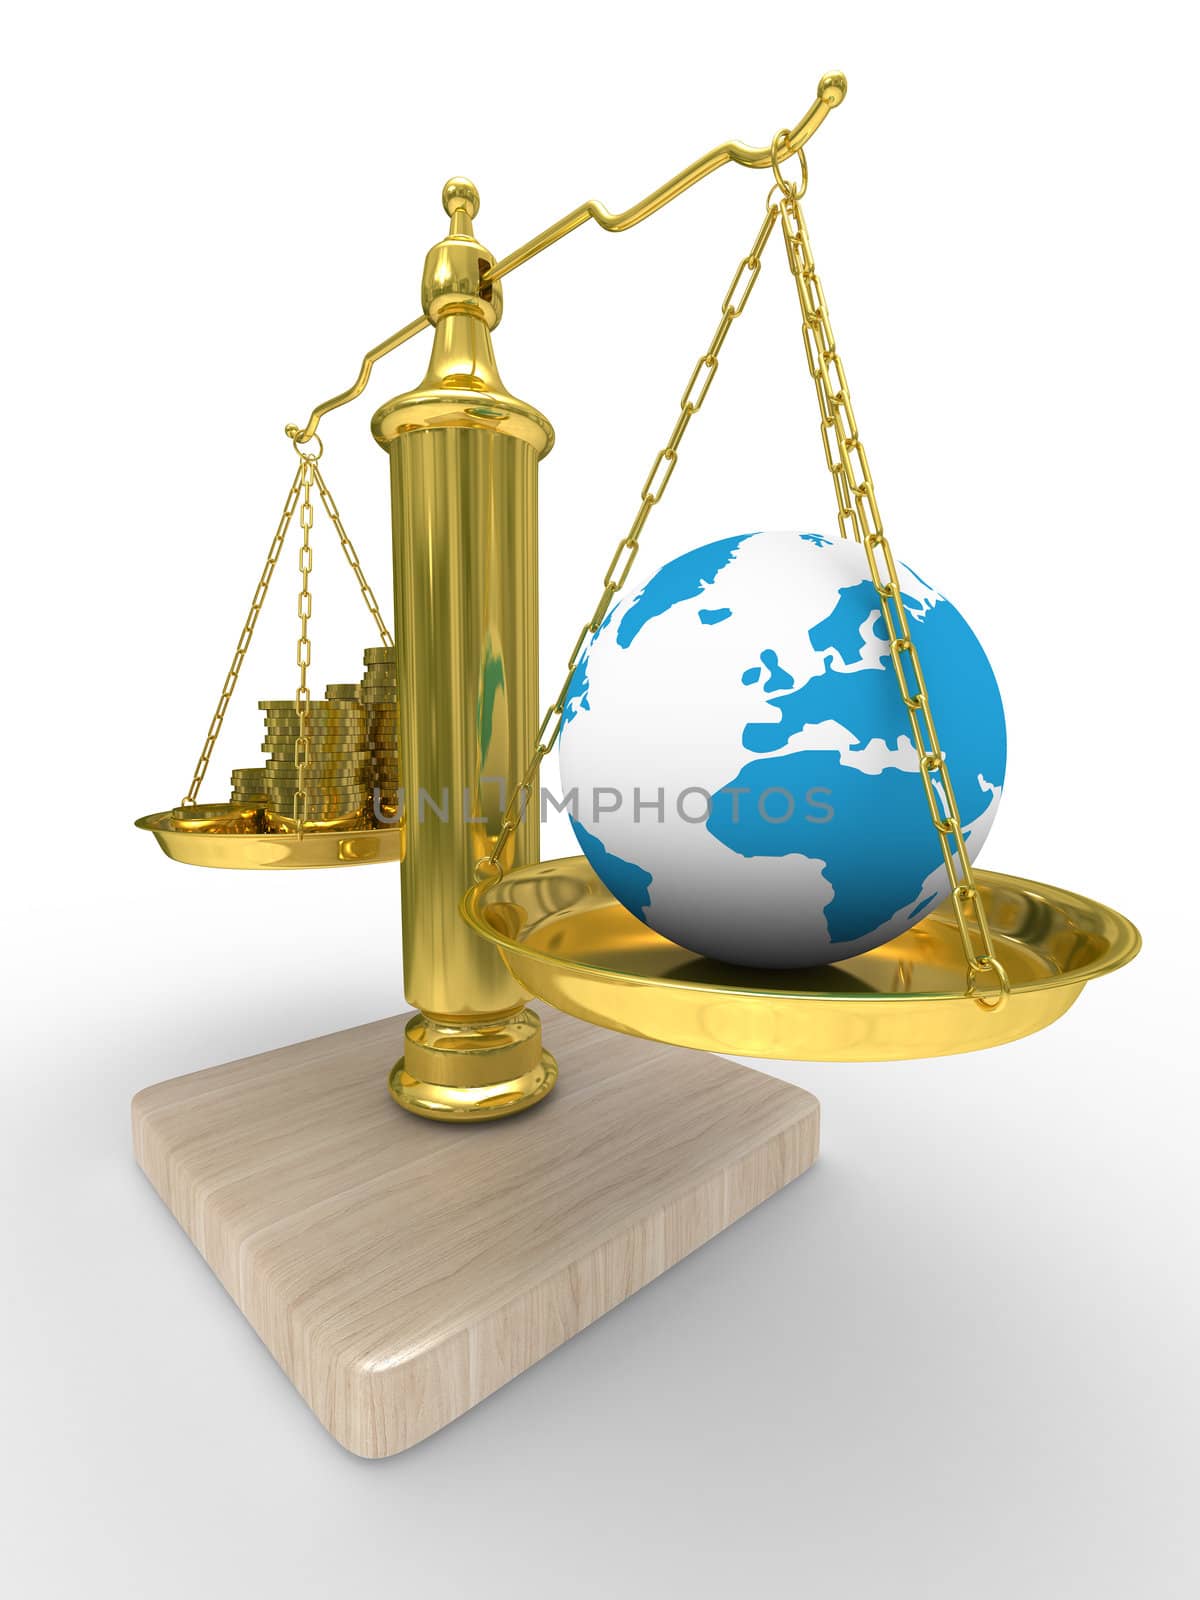 Cashes and the globe on scales. Isolated 3D image